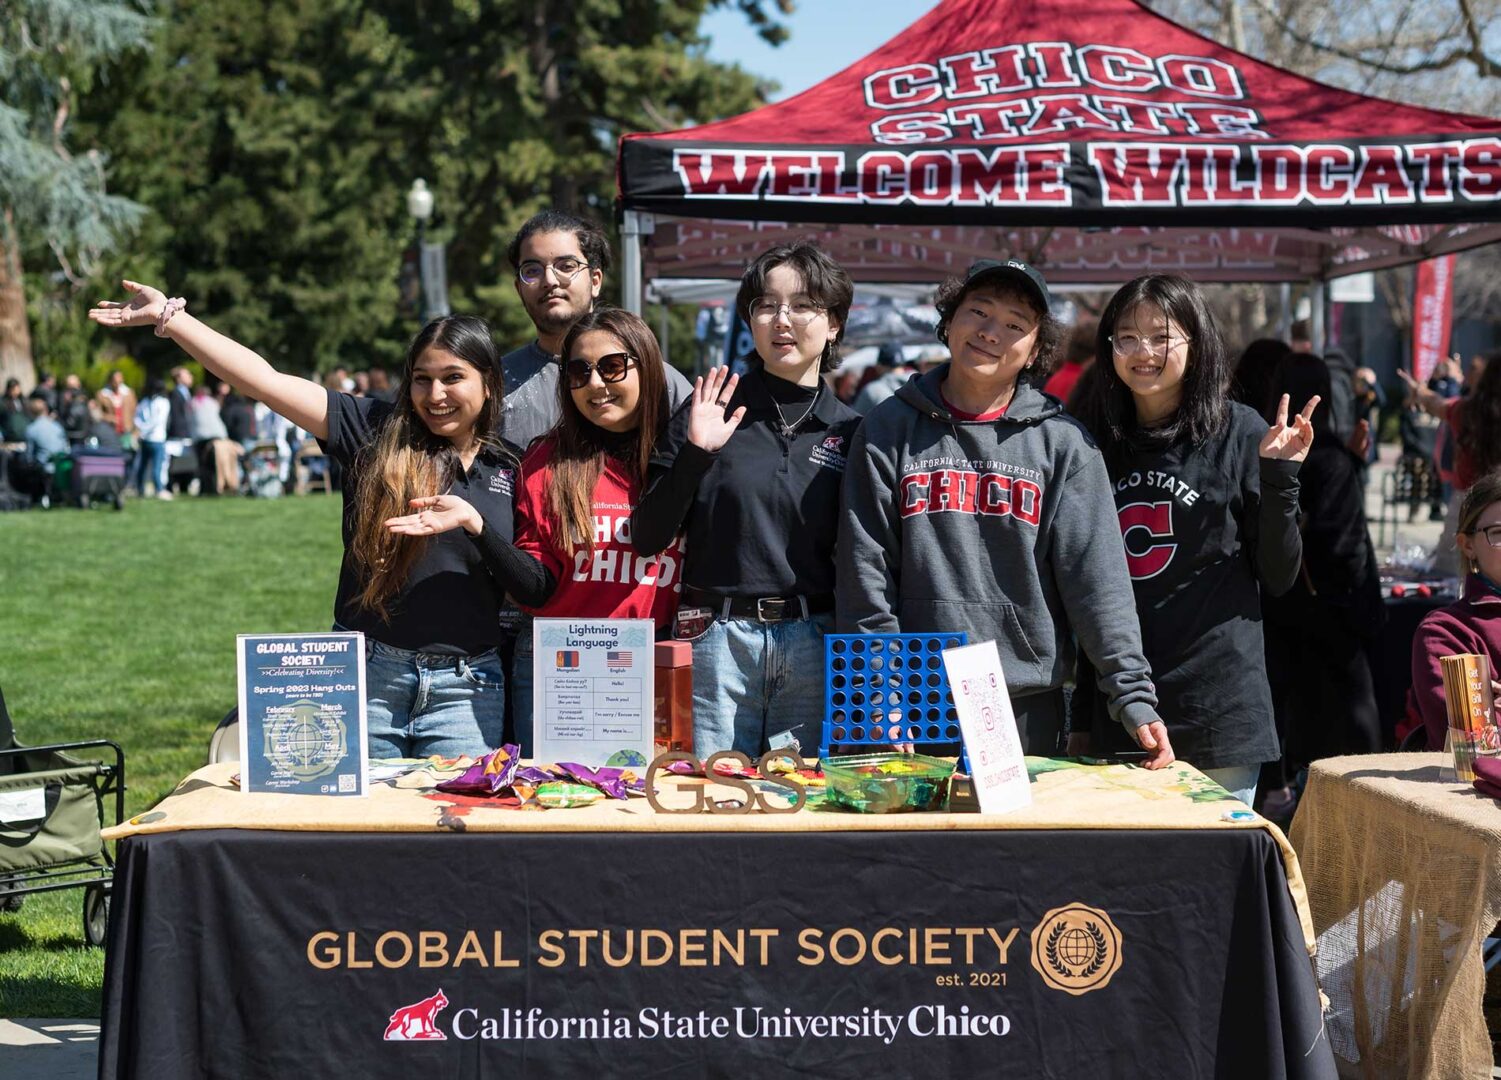 International students in the Global Student Society pose at their table during the annual Choose Chico event on campus during a sunny April afternoon.